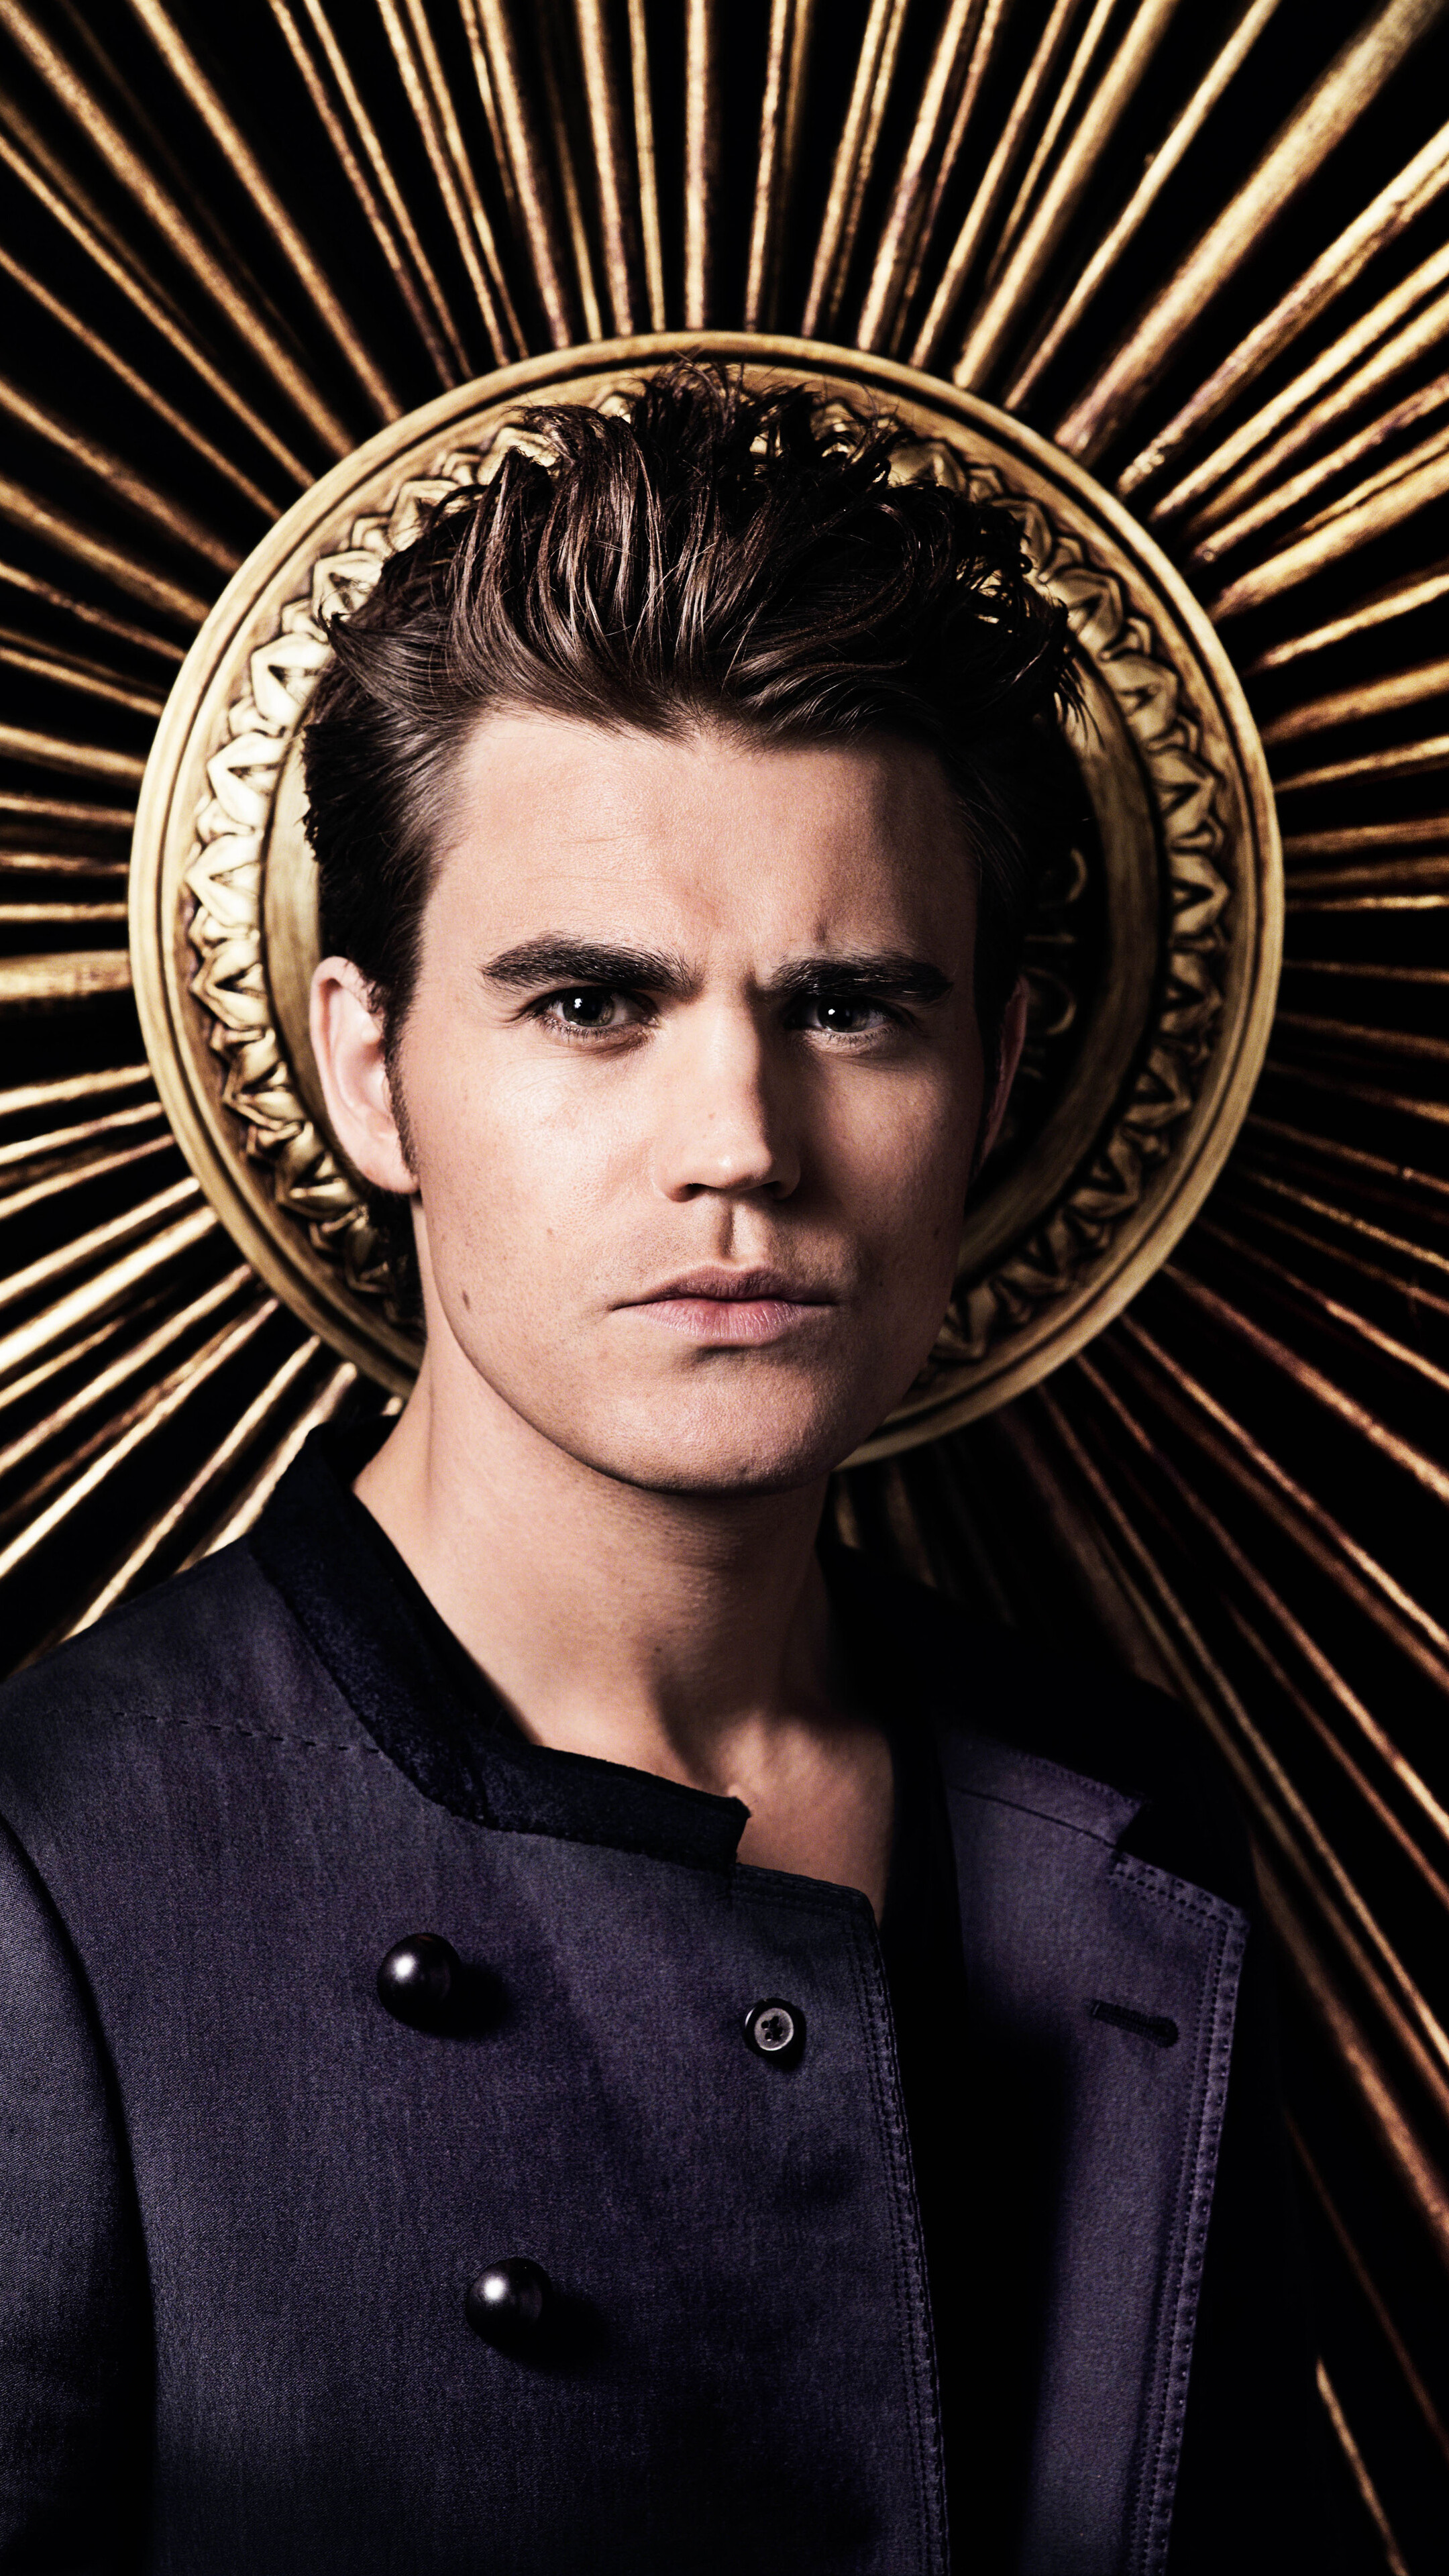 The Vampire Diaries (TV Series): Paul Wesley As Stefan Salvatore, American Actor, Director And Producer 
Paul Wesley As Stefan Salvatore The Vampire Diaries 4k Sony Xperia X,XZ,Z5 Premium HD 4k Wallpapers, Images, Backgrounds, Photos and PicturesPaul Wesley As Stefan Salvatore The Vamp. 2160x3840 4K Background.